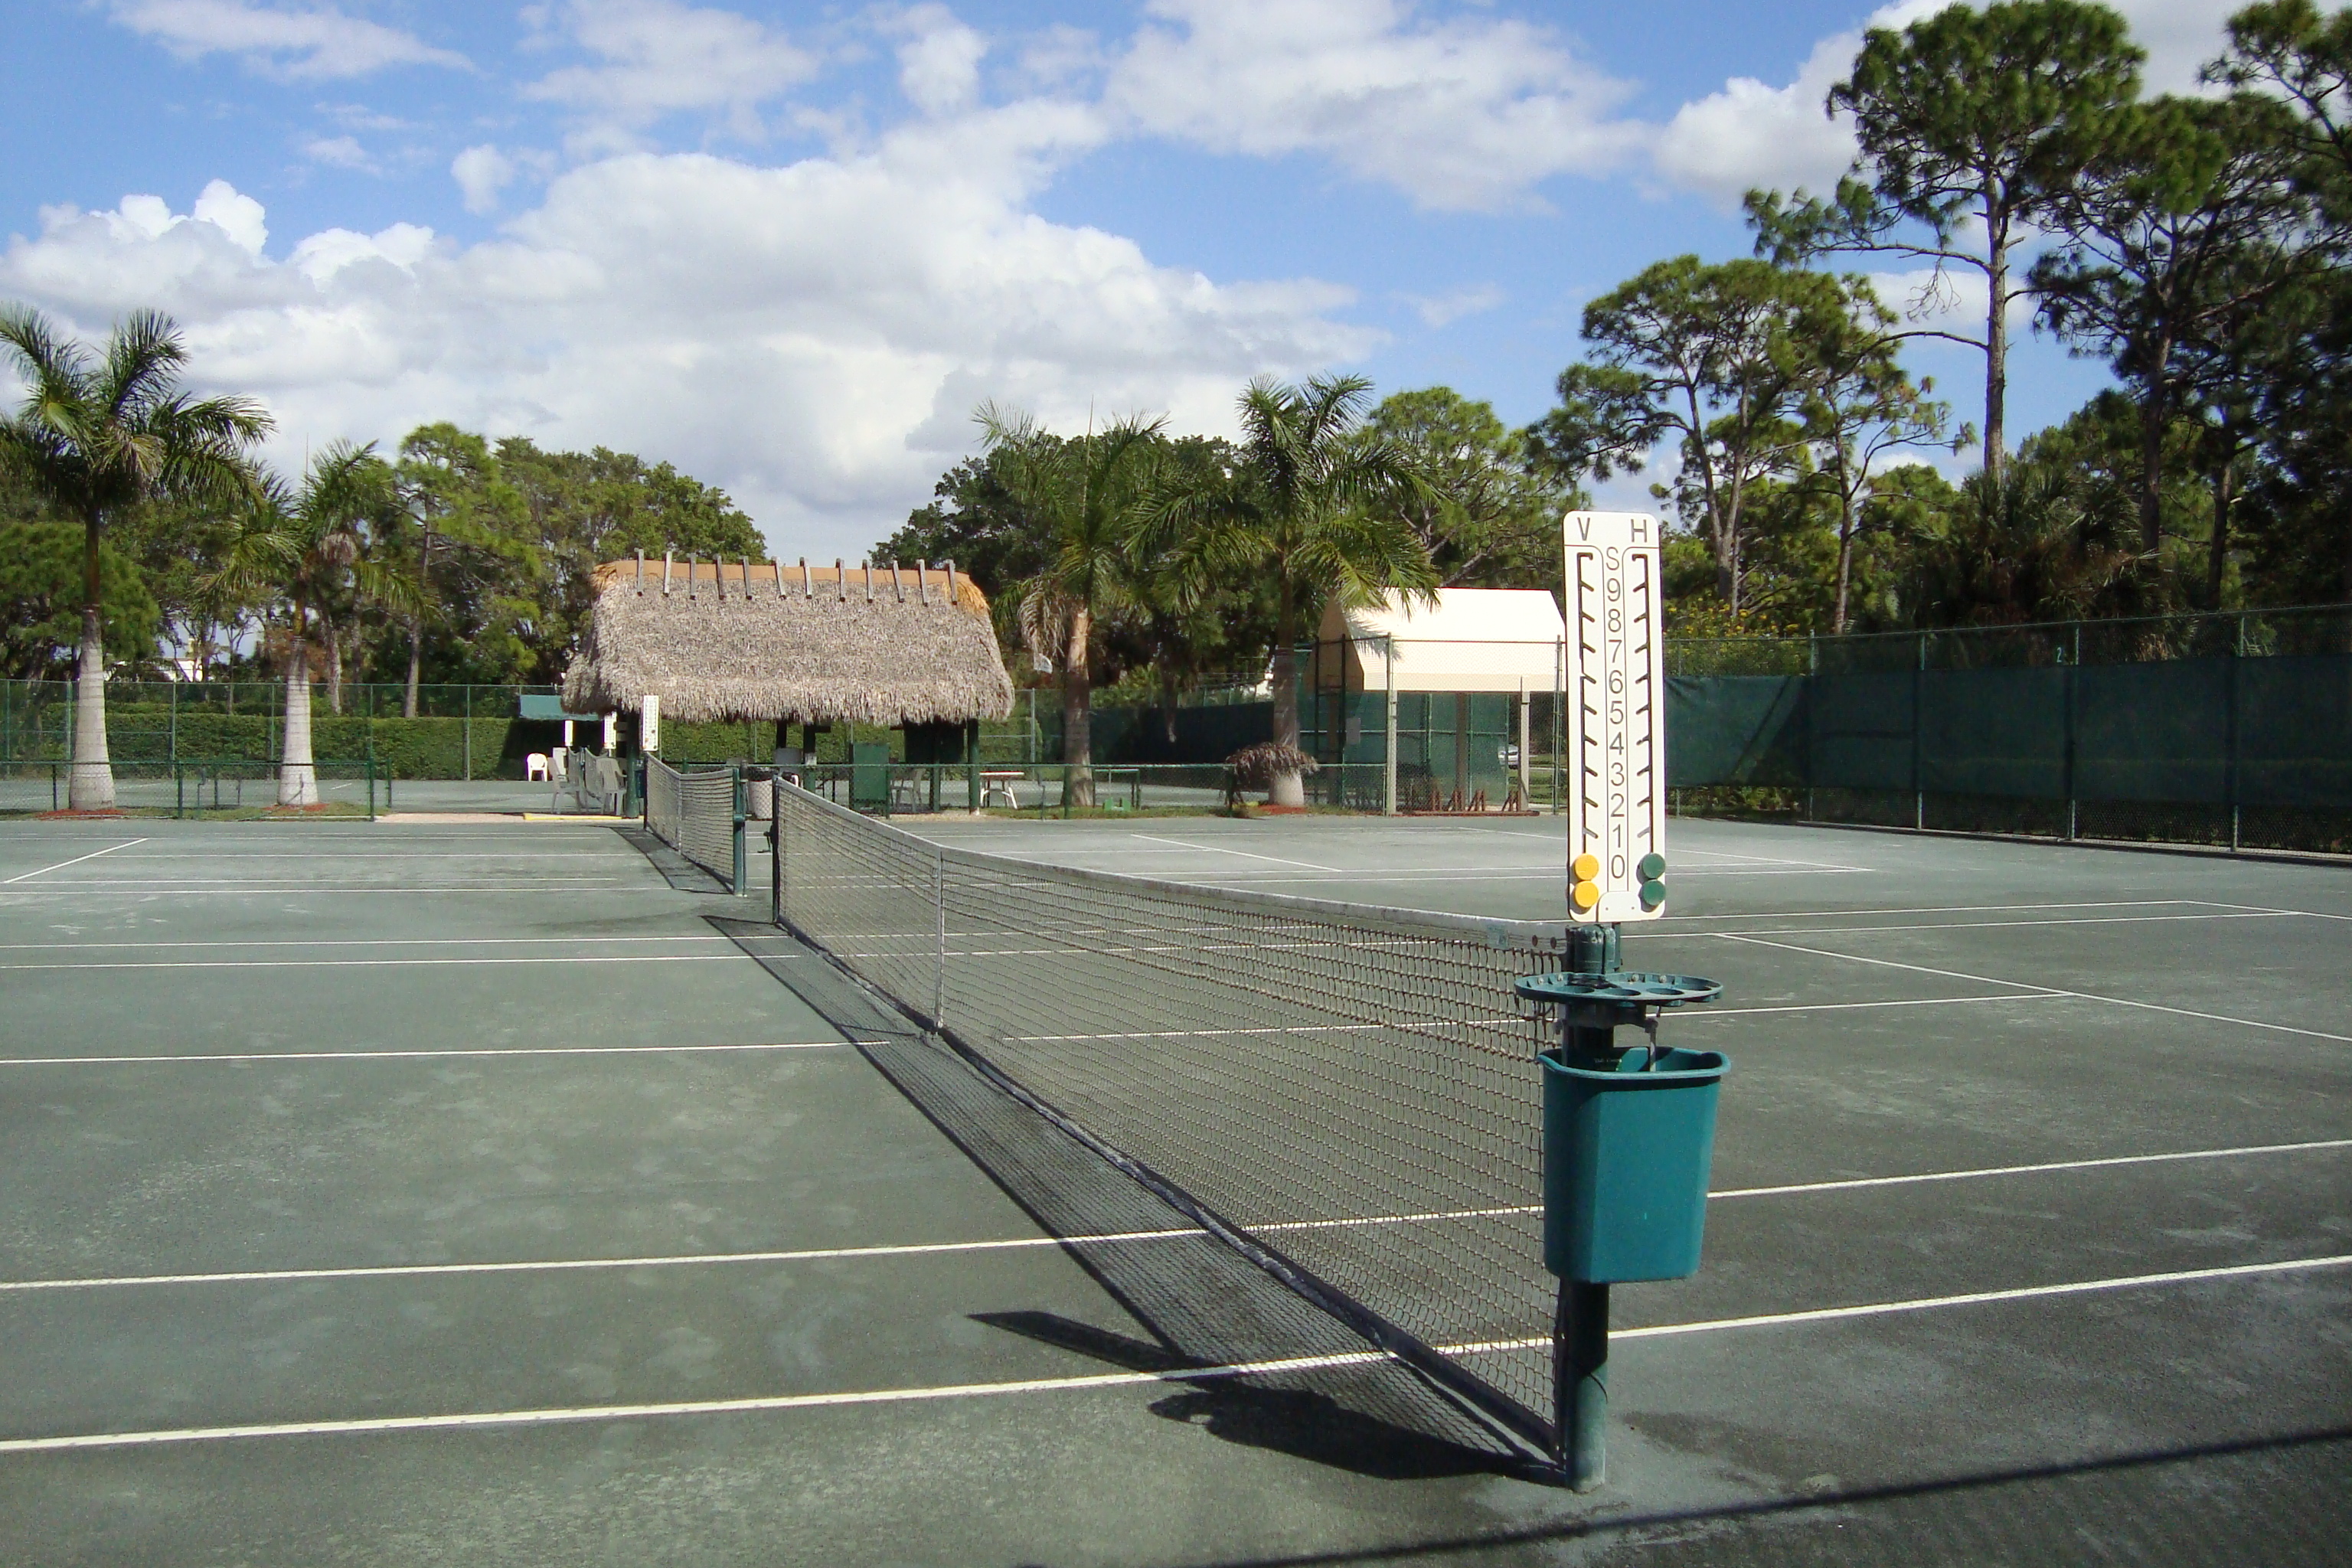 Tennis courts at Bay Forest in Naples, Florida.